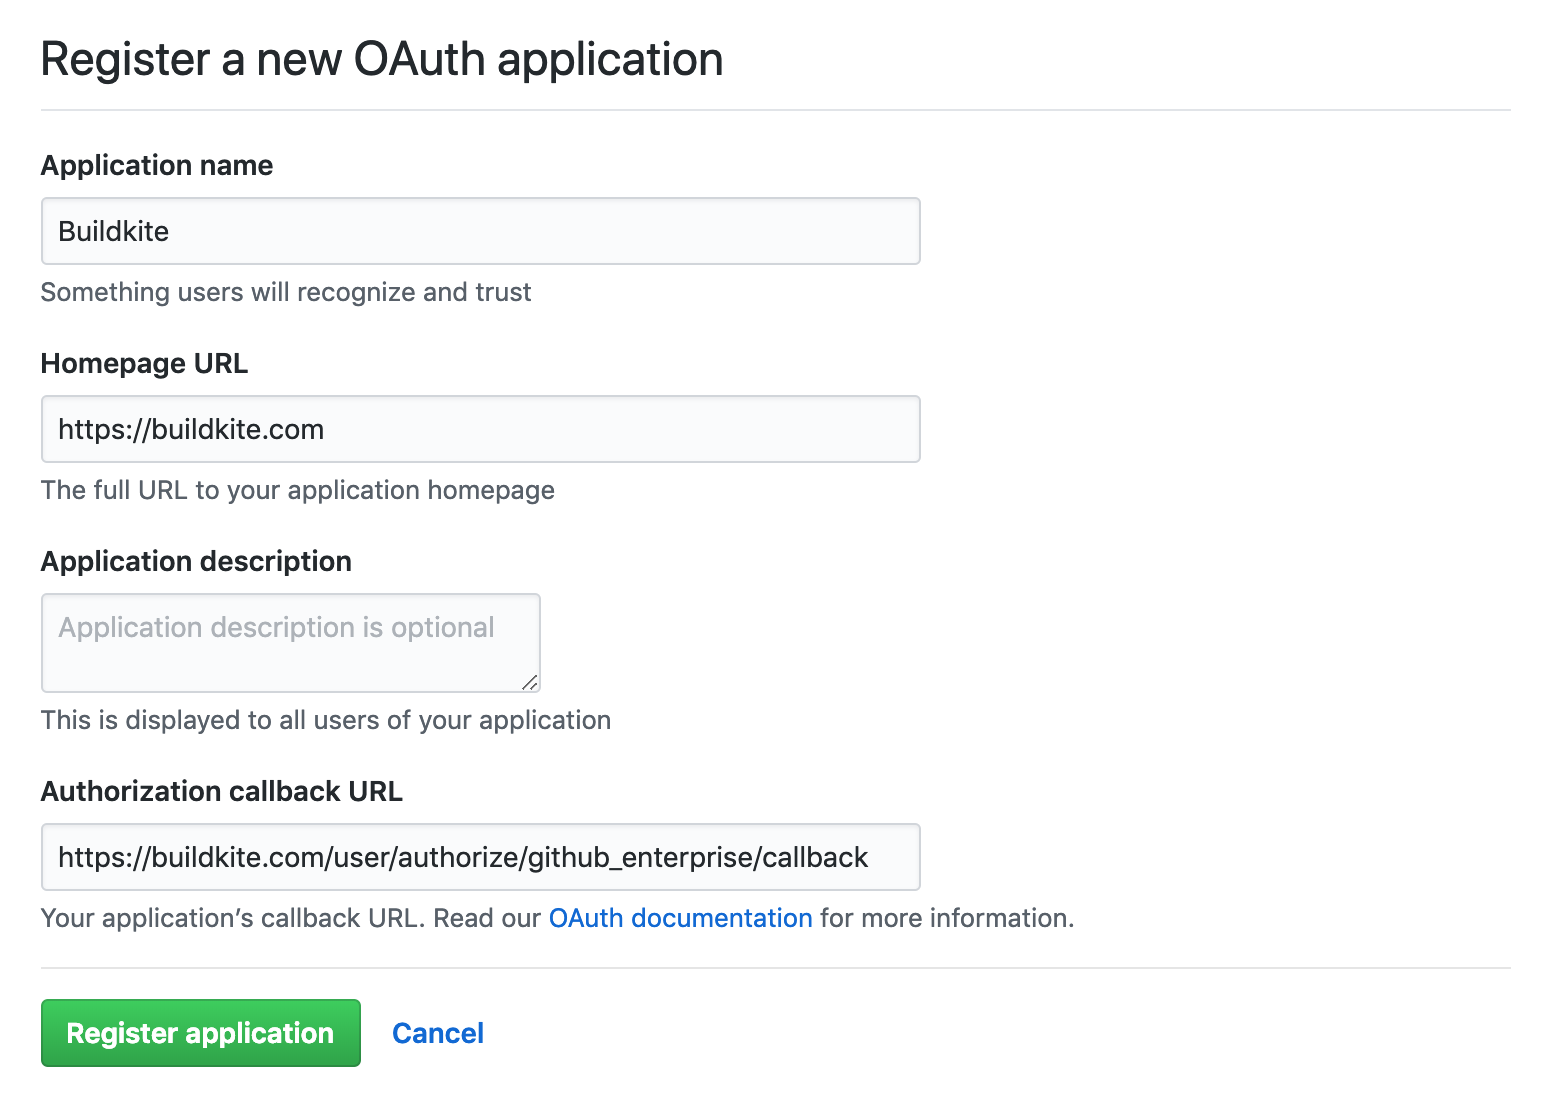 Screenshot of the form to Register an OAuth Application